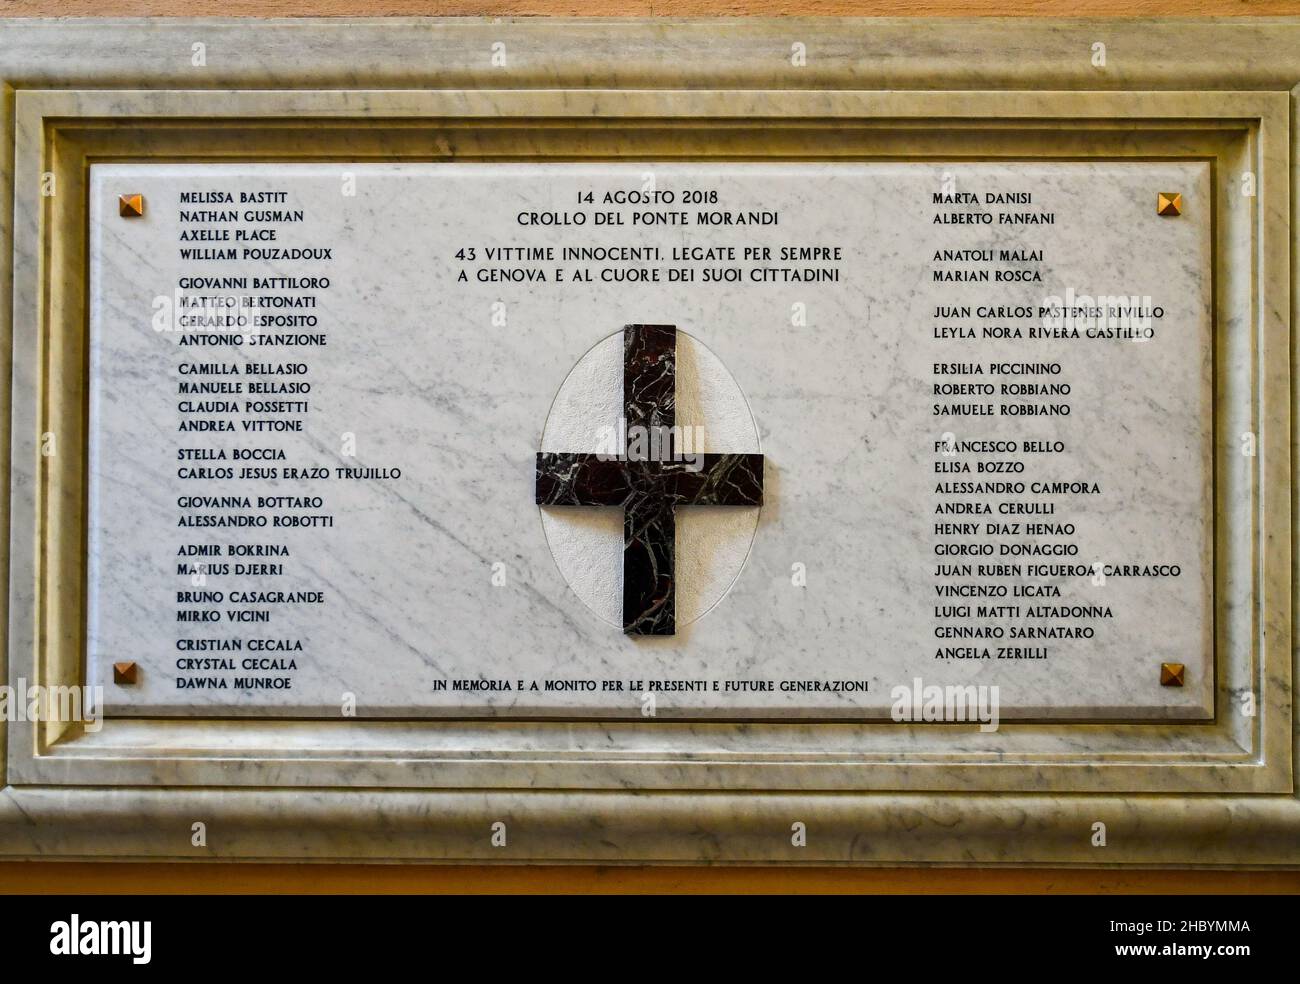 Memorial plaque dedicated to the victims of the collapse of Ponte Morandi (2018), on a wall of the entrance of the town hall of Genoa, Liguria, Italy Stock Photo